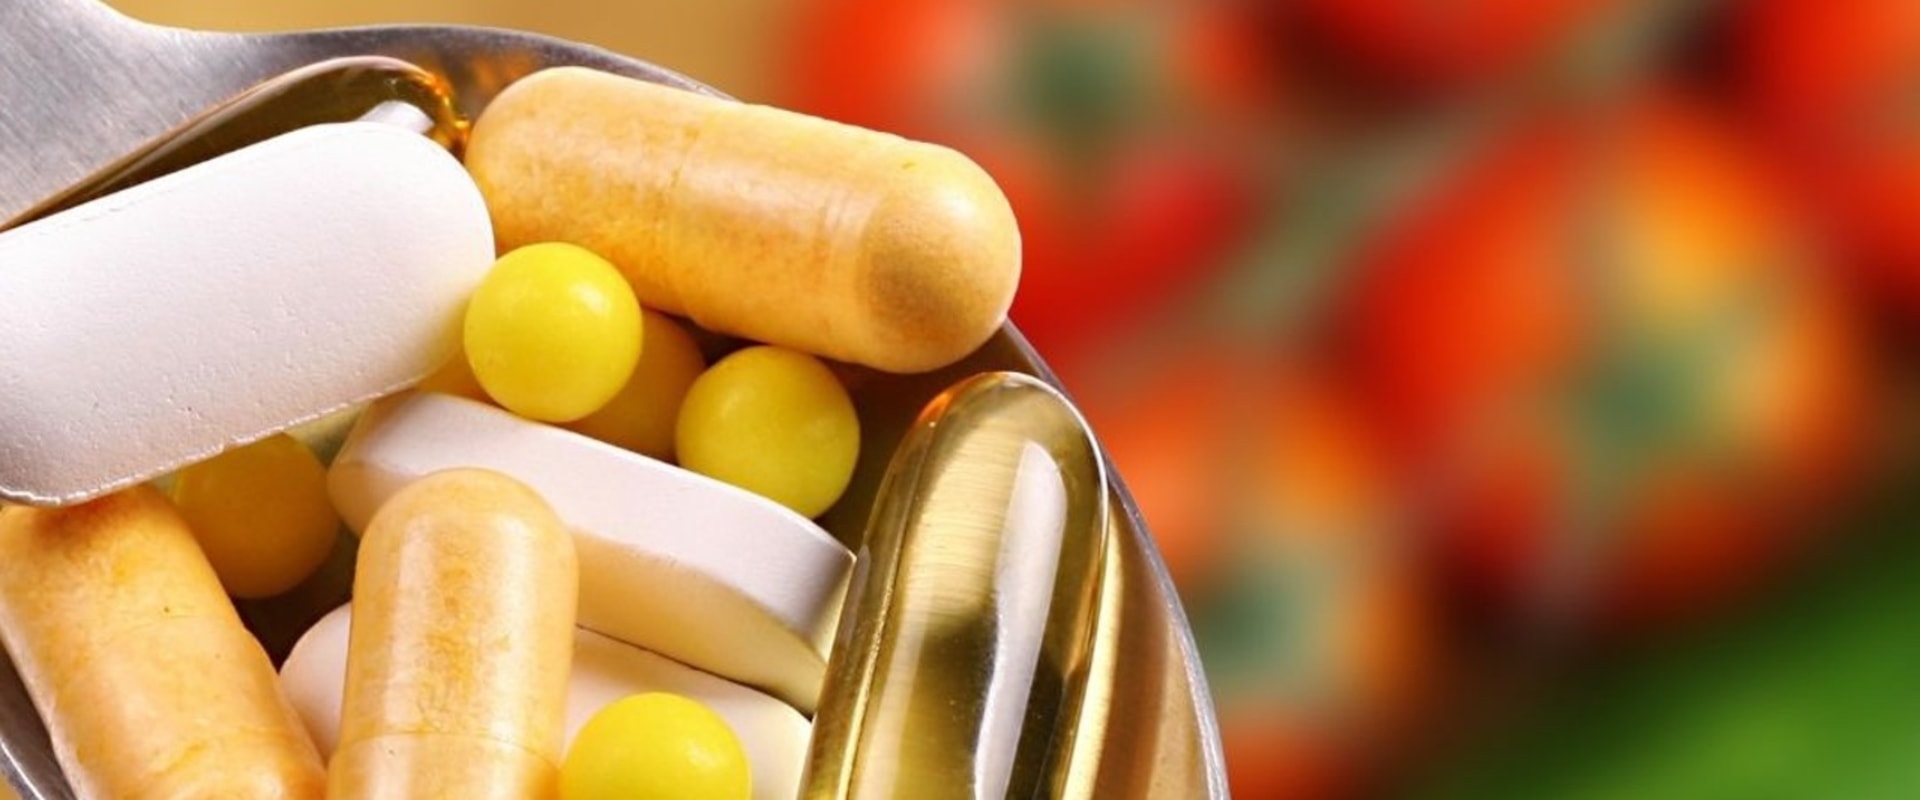 Are Dietary Supplements Regulated by the USDA?